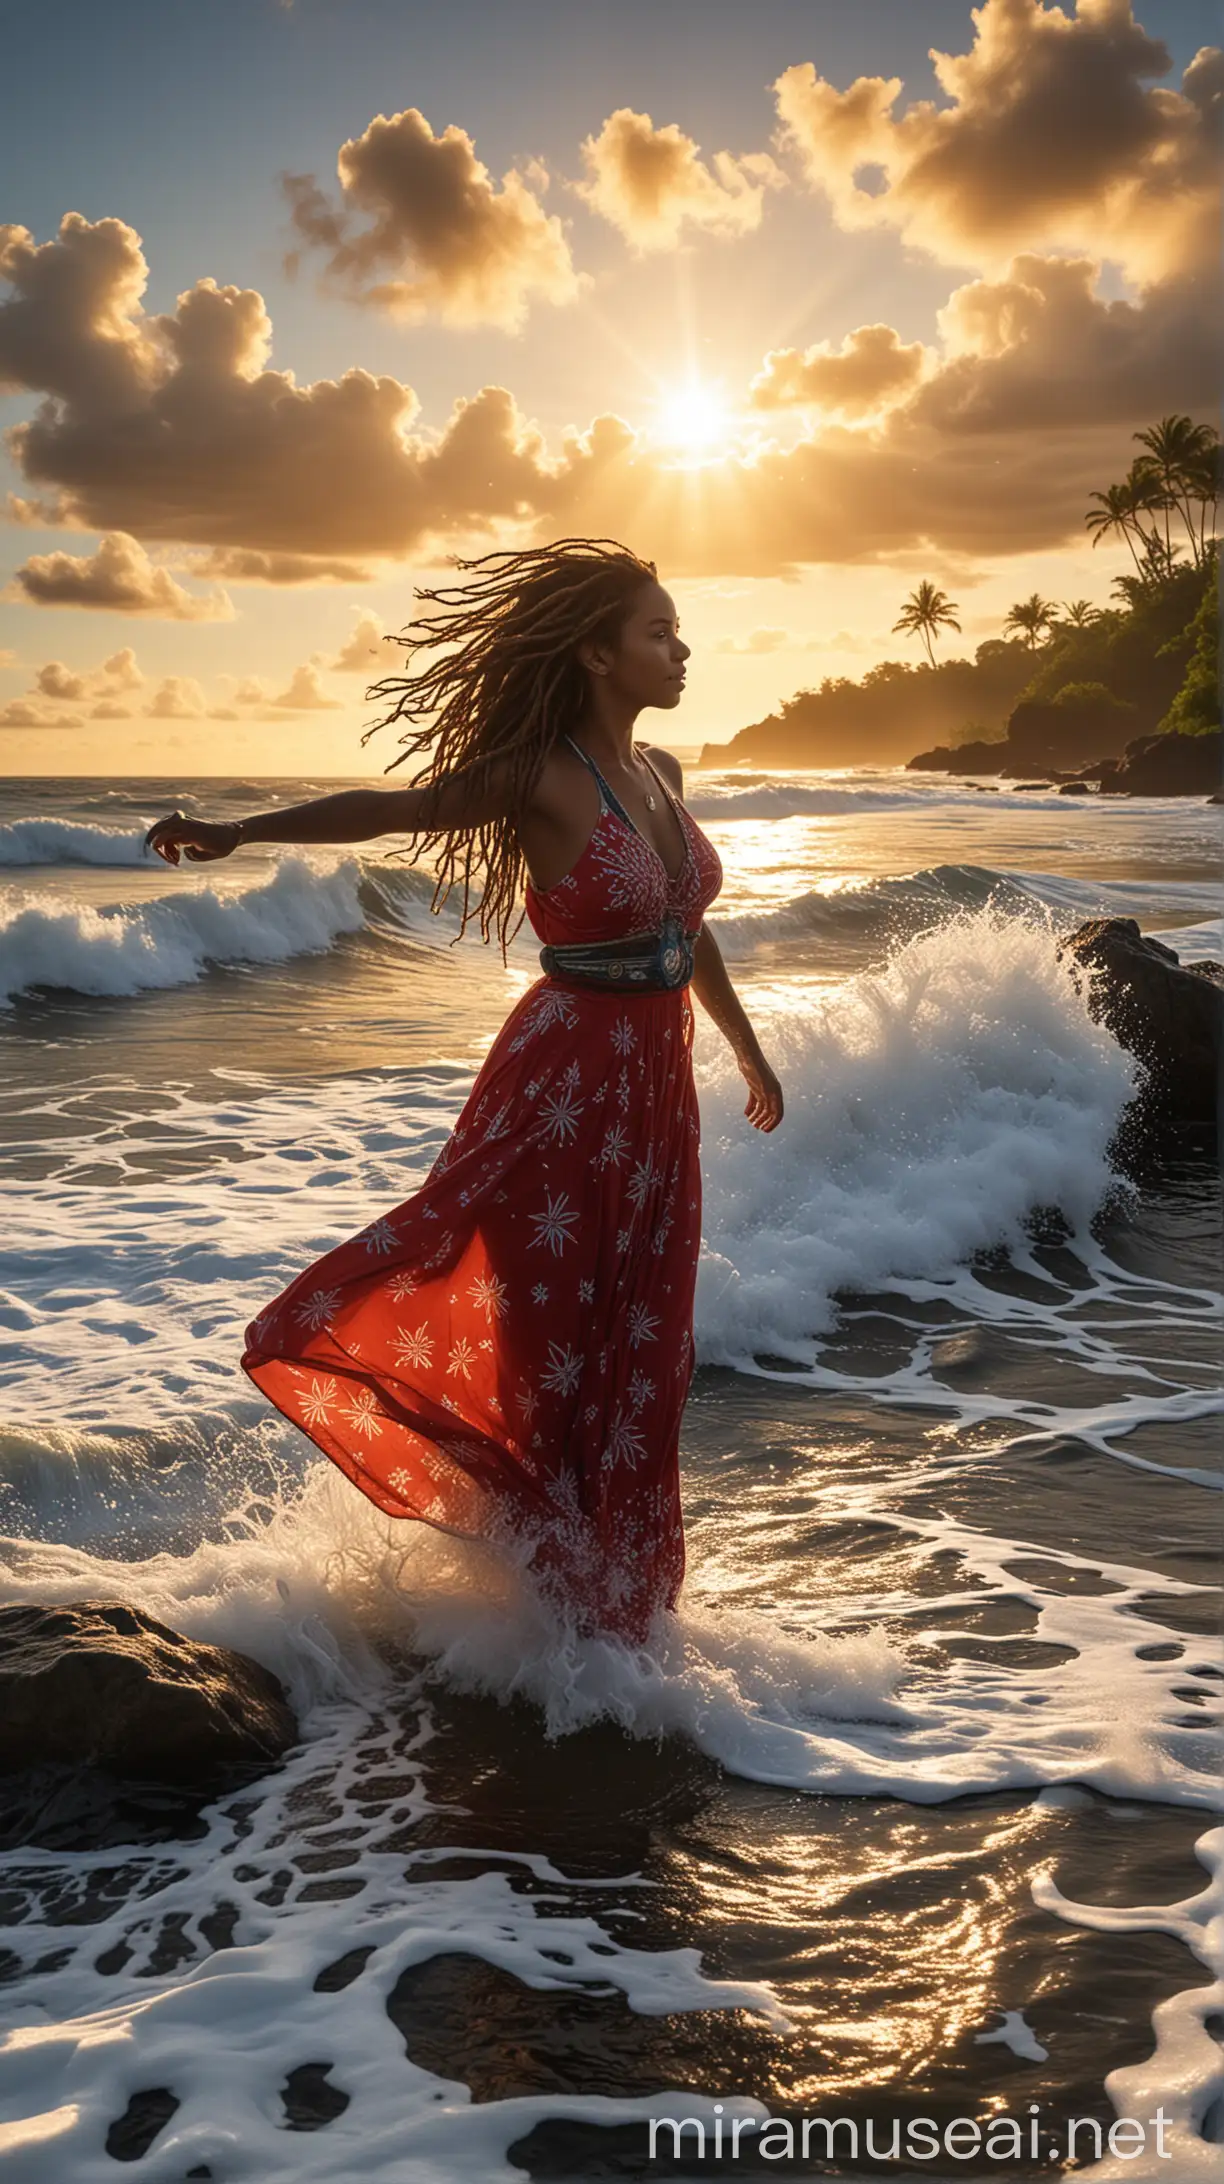 Beautiful Papuan Woman in Blue and Red Dress Amidst Splashing Waves at Sunset